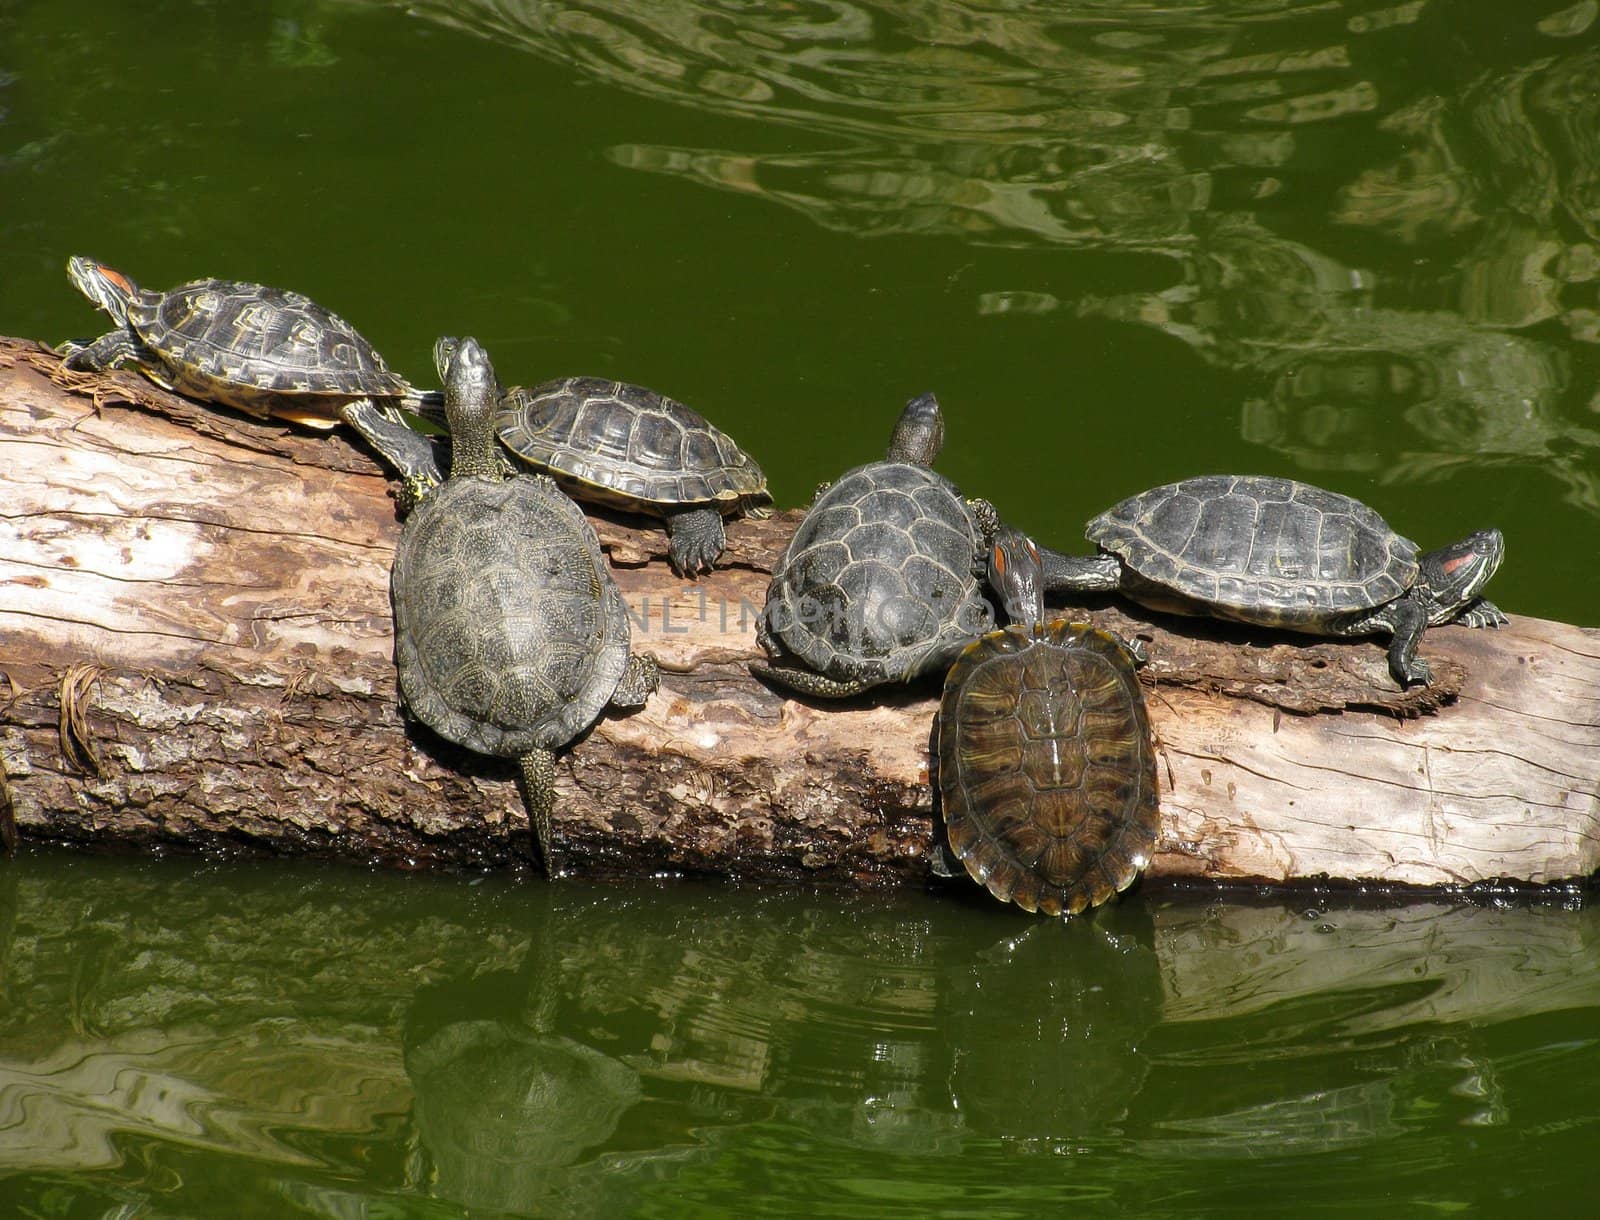 several turtles on a trunk of tree in pond